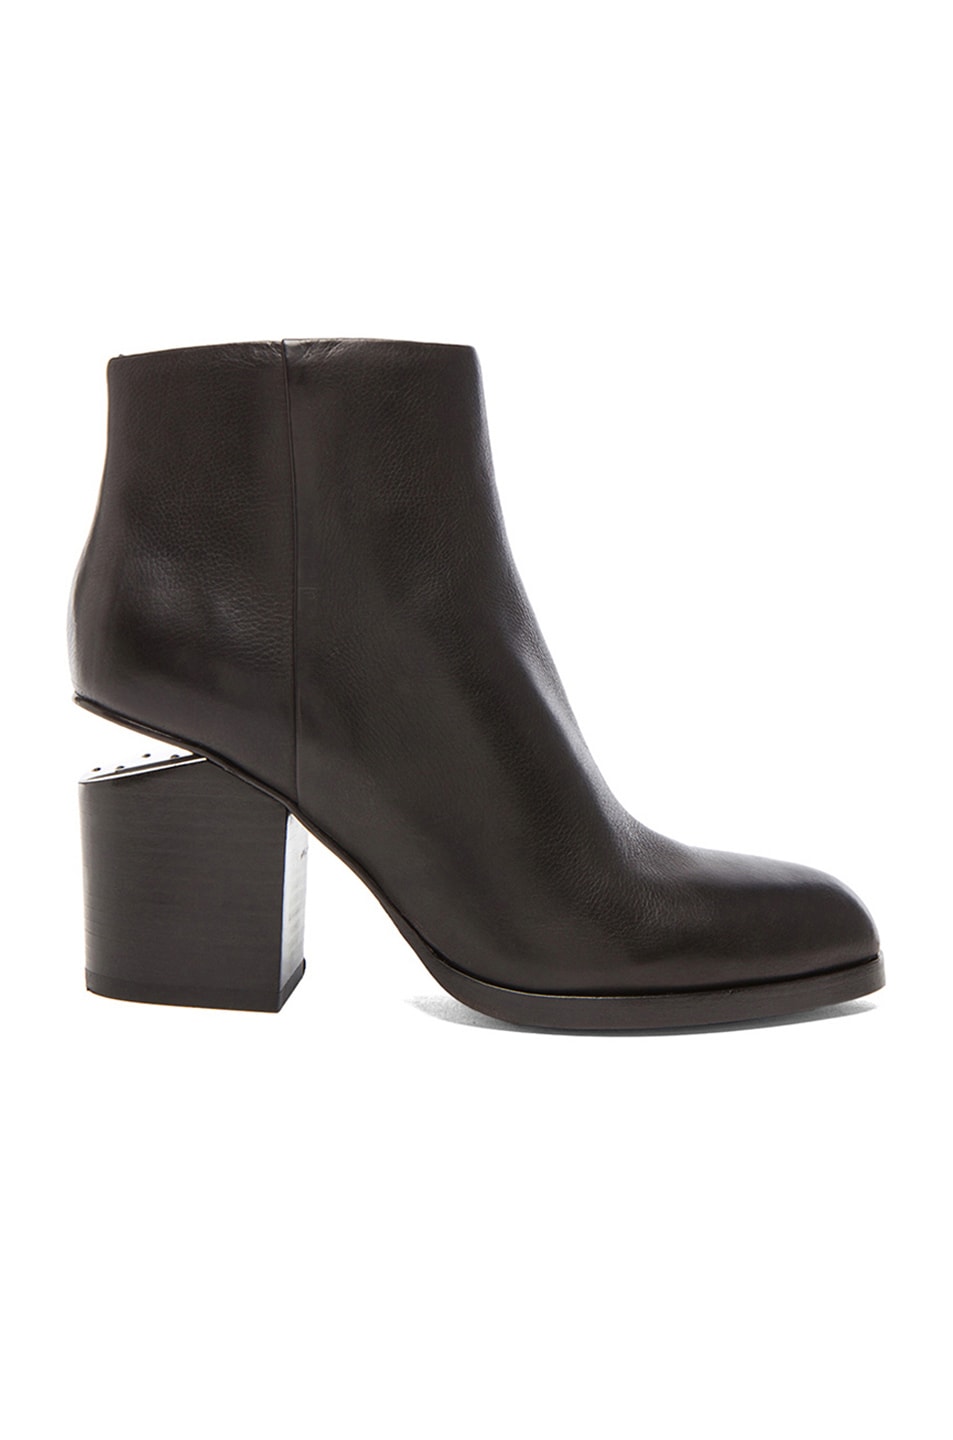 Image 1 of Alexander Wang Gabi Ankle Booties with Silver Hardware in Black